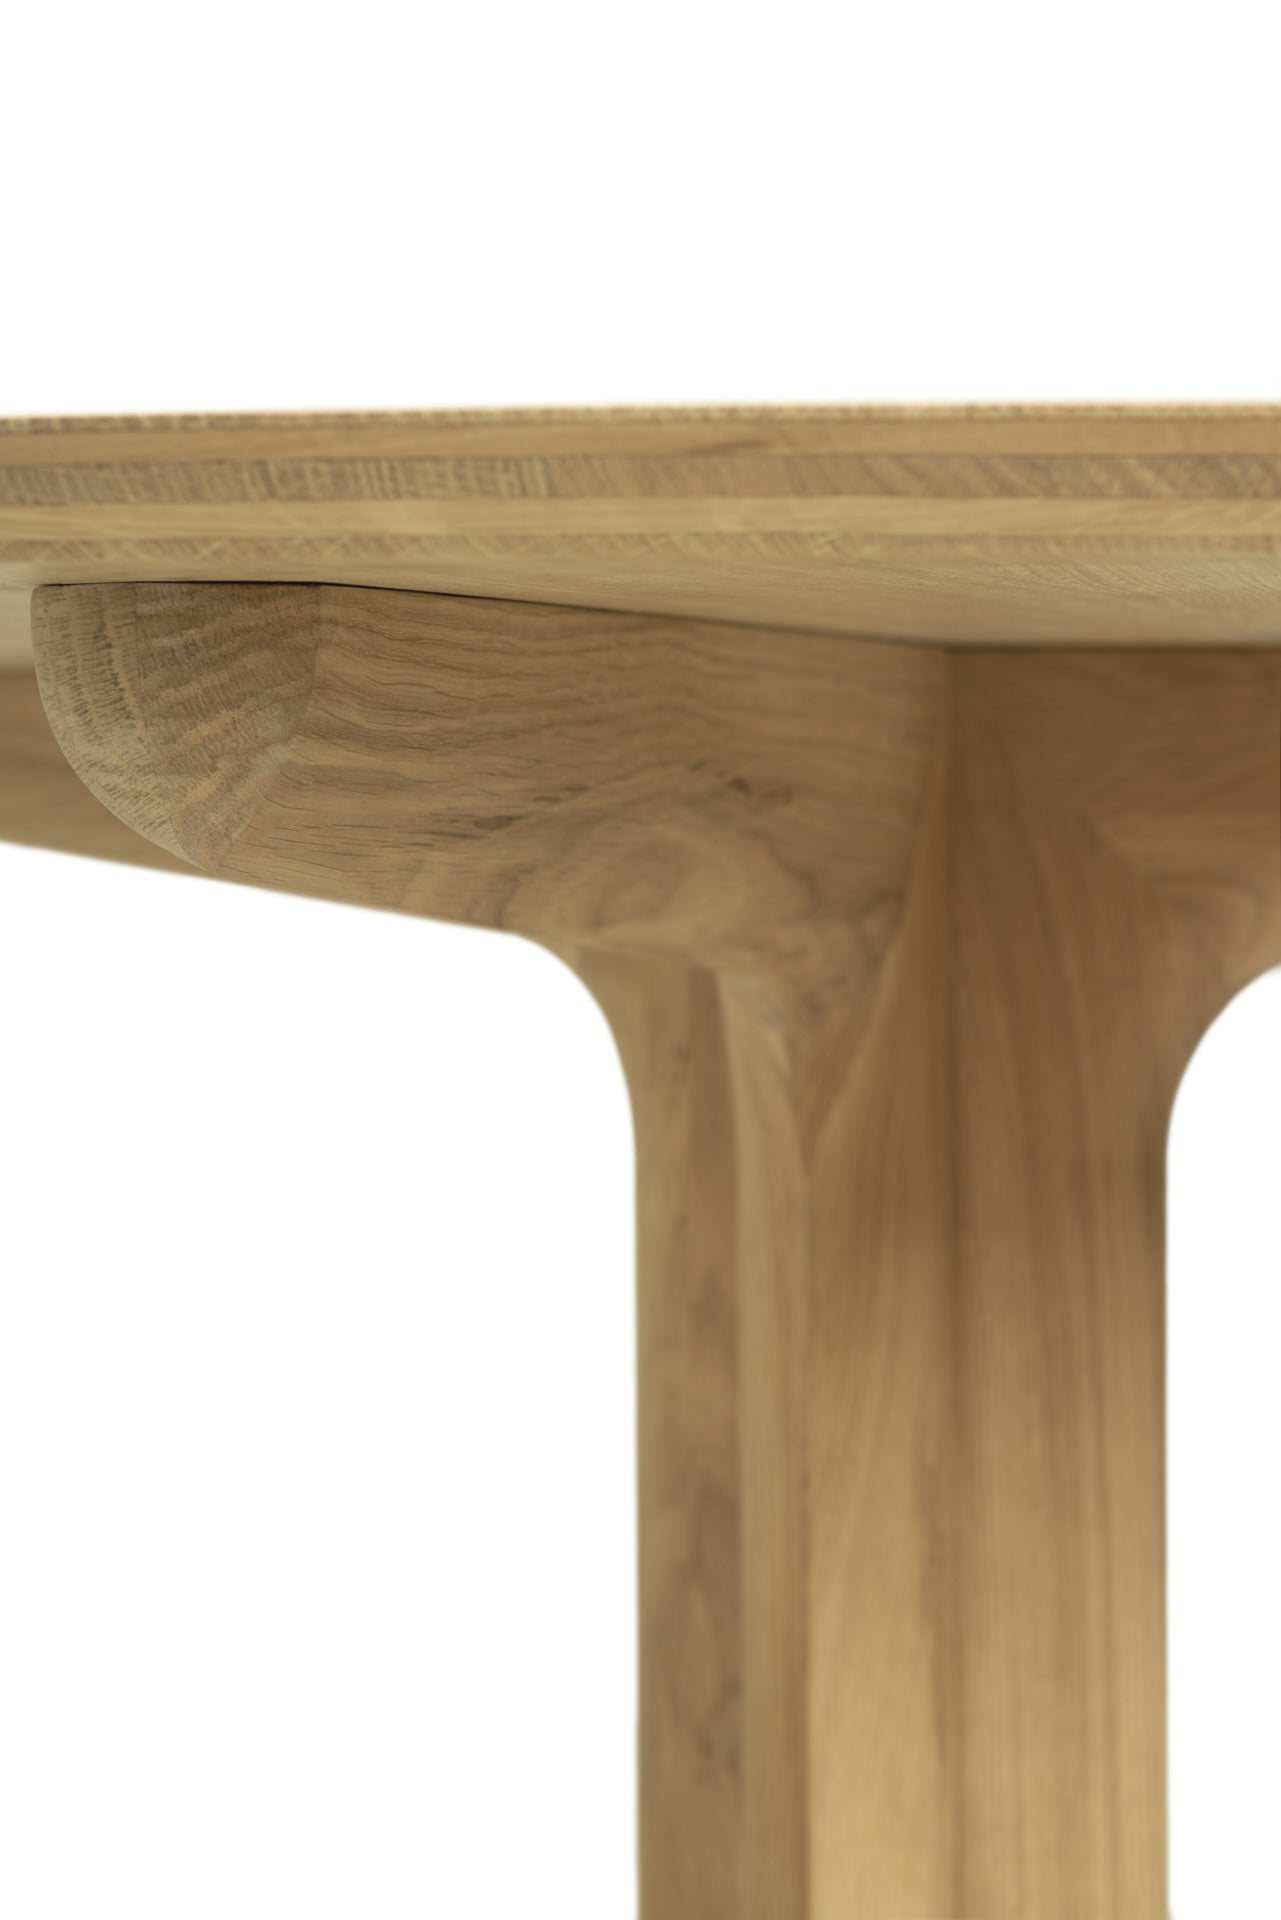 Corto Solid Oak Dining Table, Round